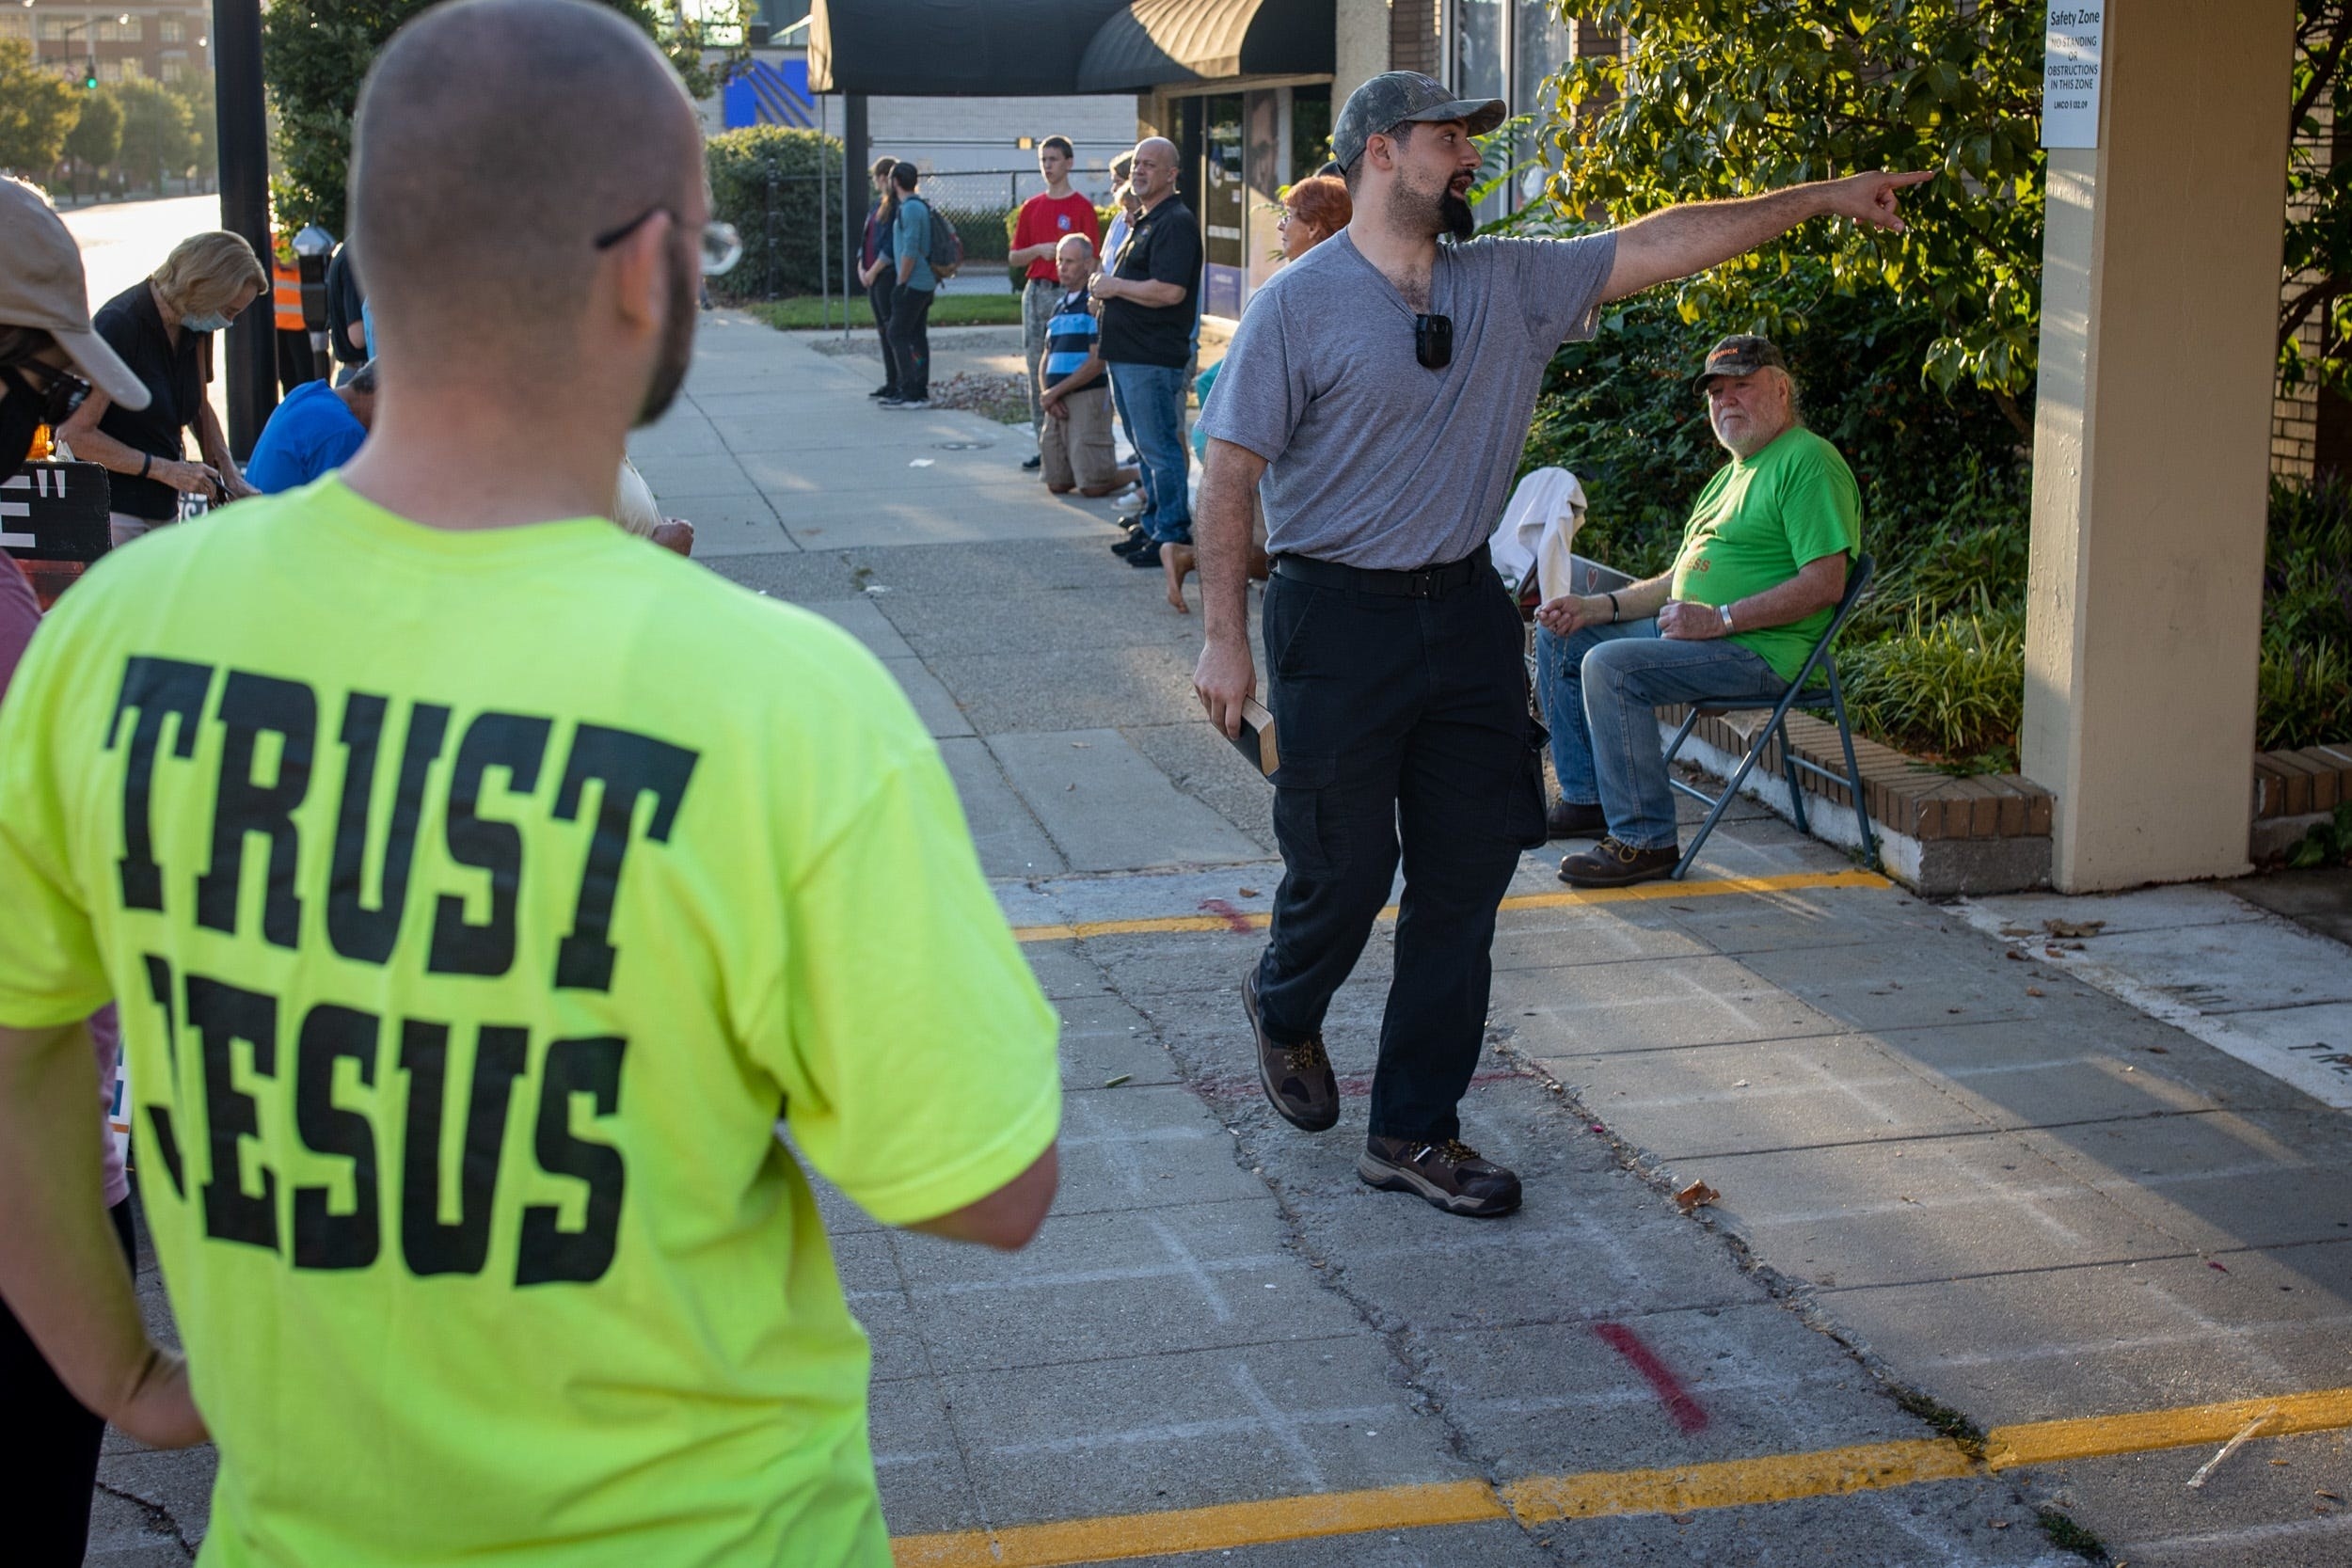 A person with &quot;Trust Jesus&quot; on the back of their T-shirt watches the protester